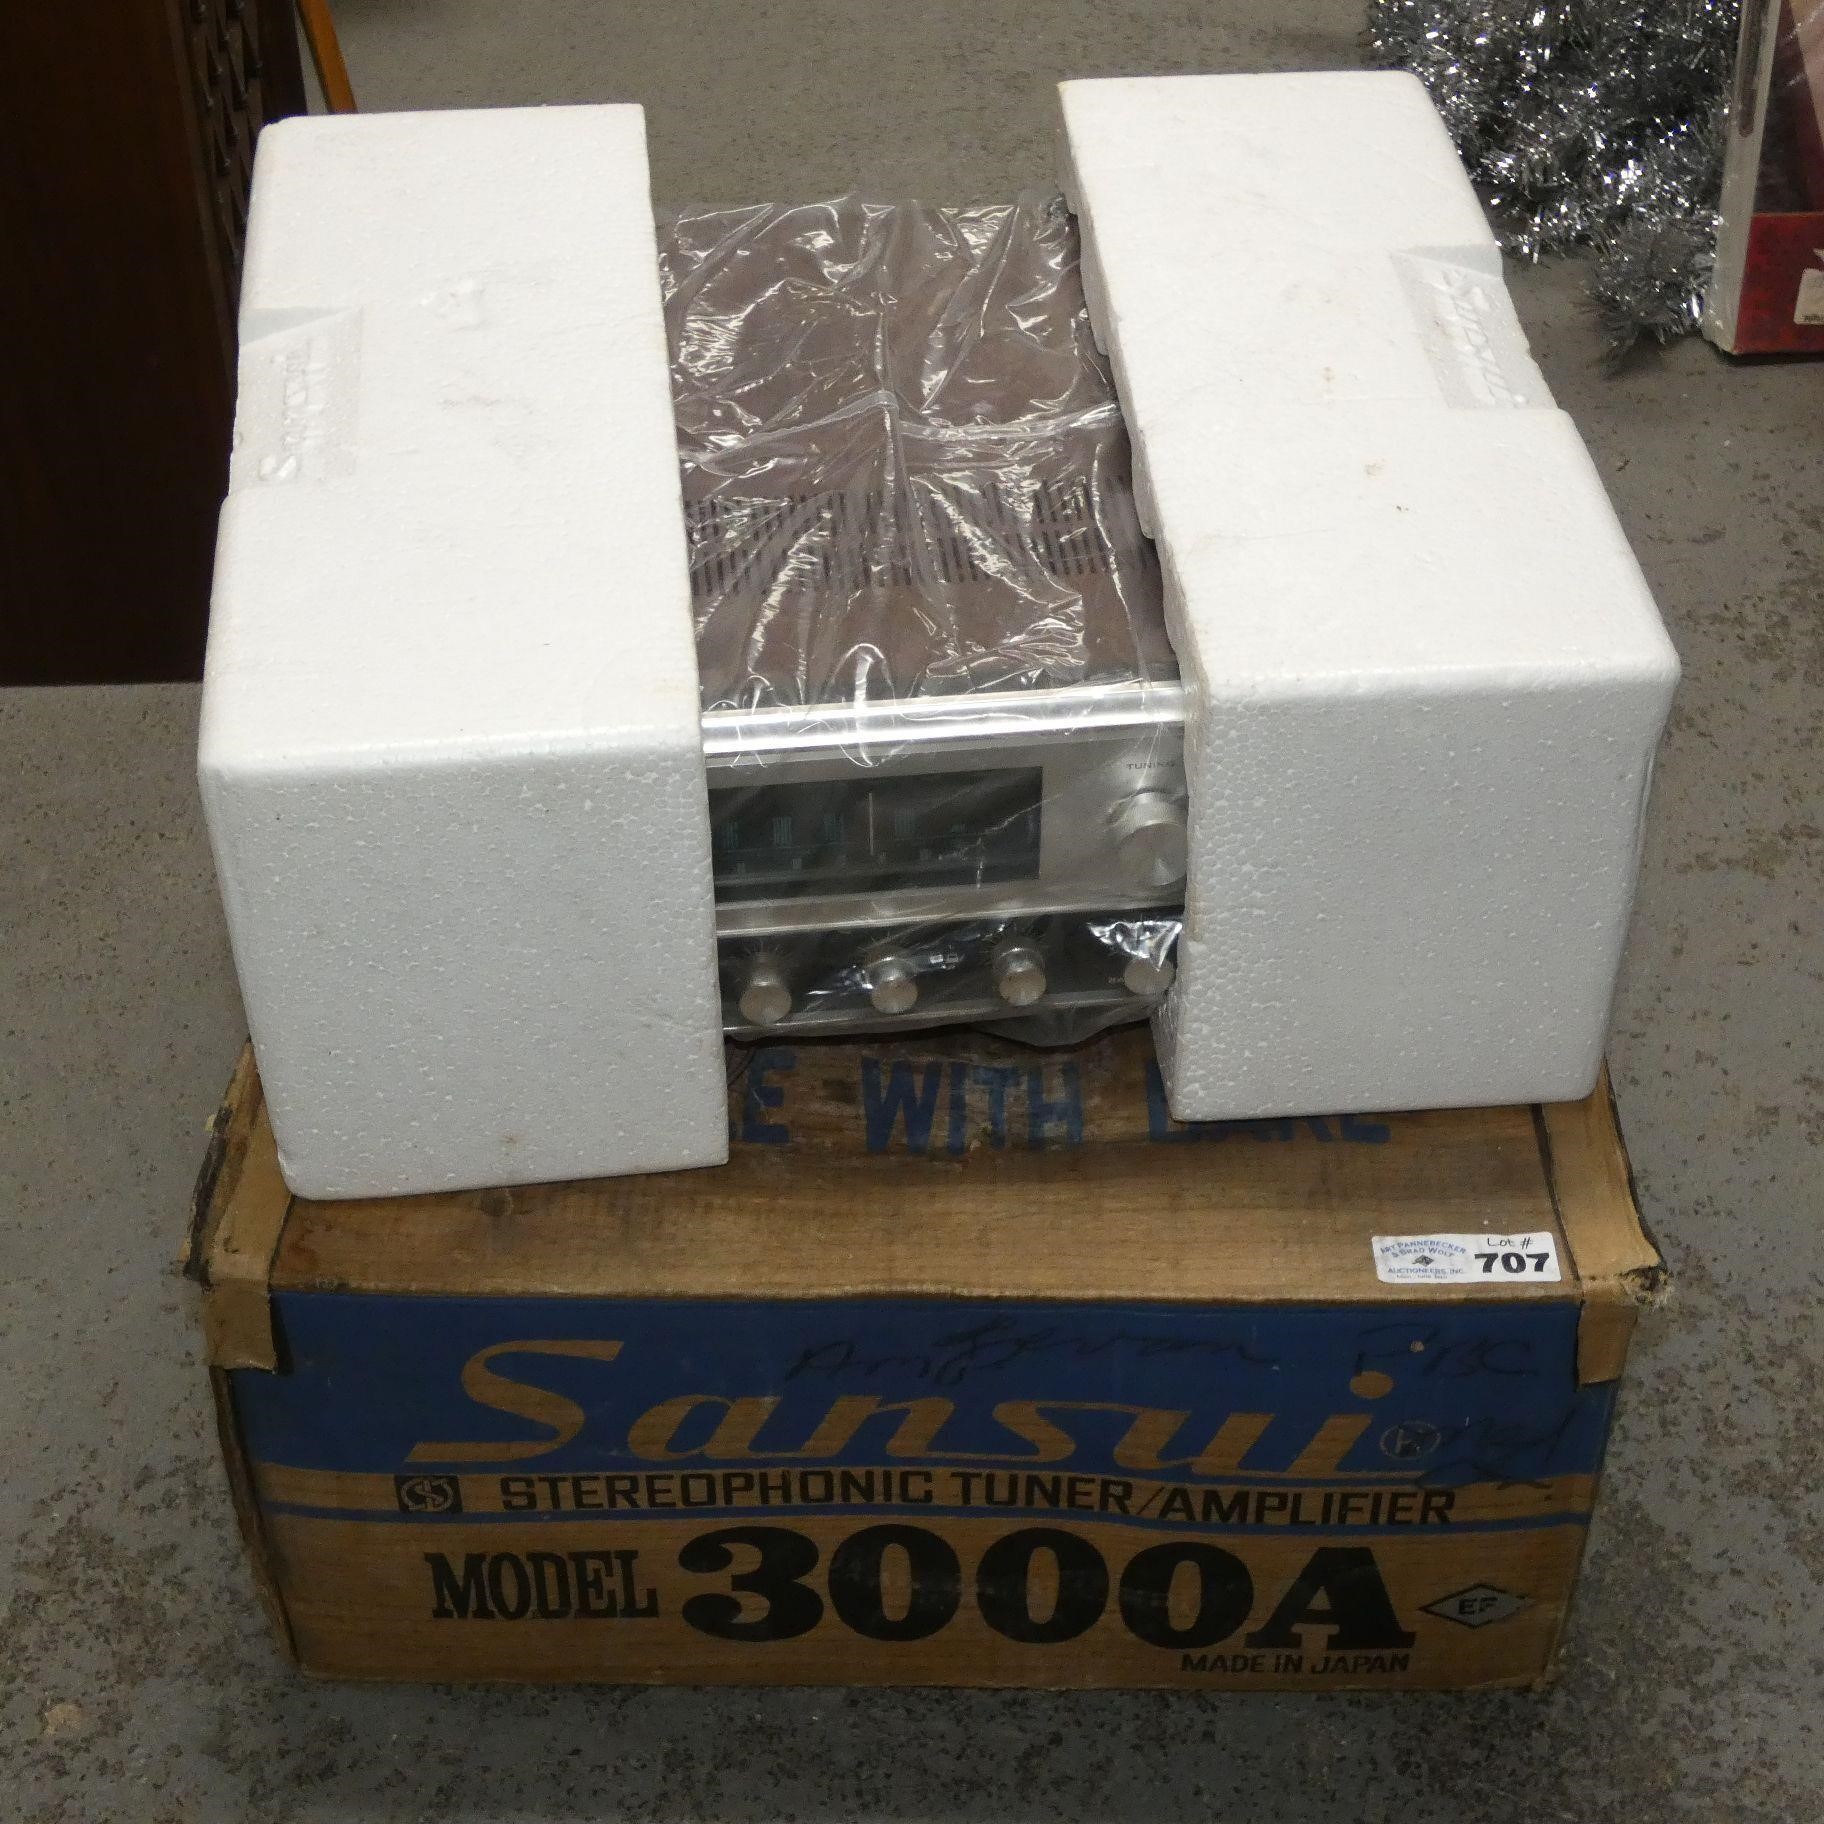 Sansui Stereophonic Tuner/Amplifier 3000A